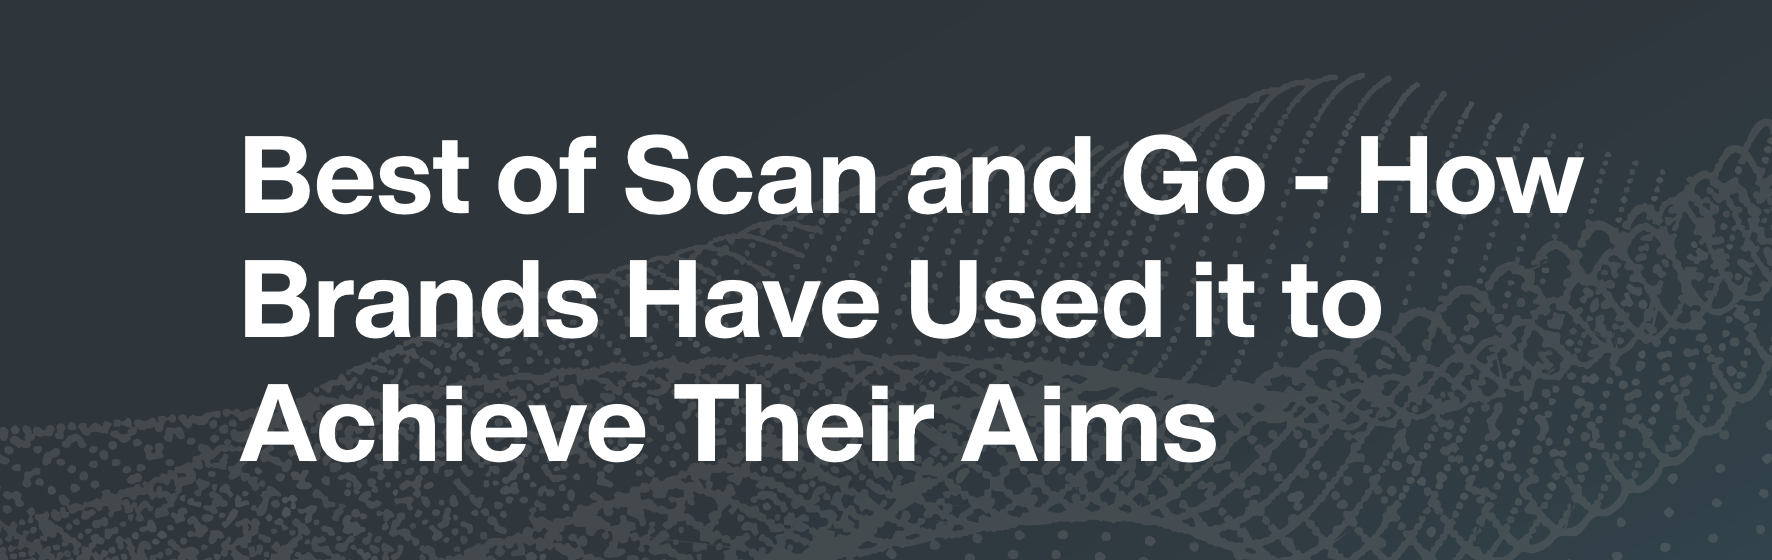 Best of Scan and Go – How Brands Have Used it to Achieve Their Aims